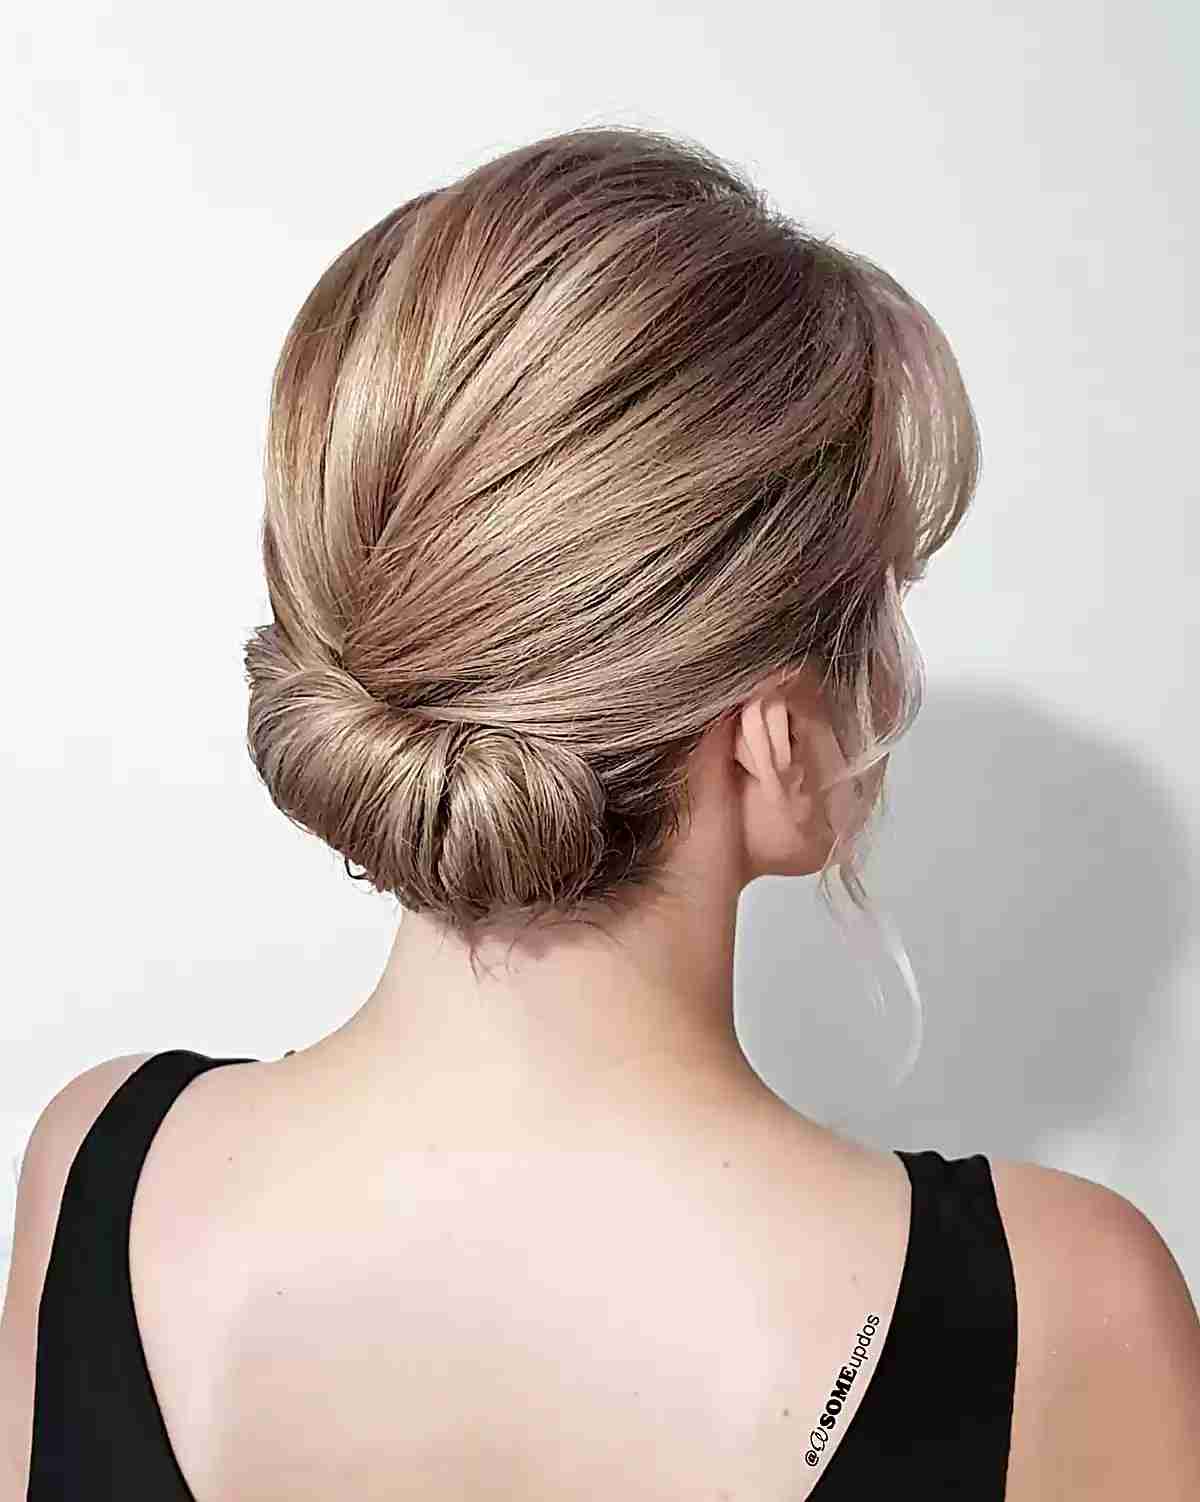 Short Low French Style Side Bun for Prom Night